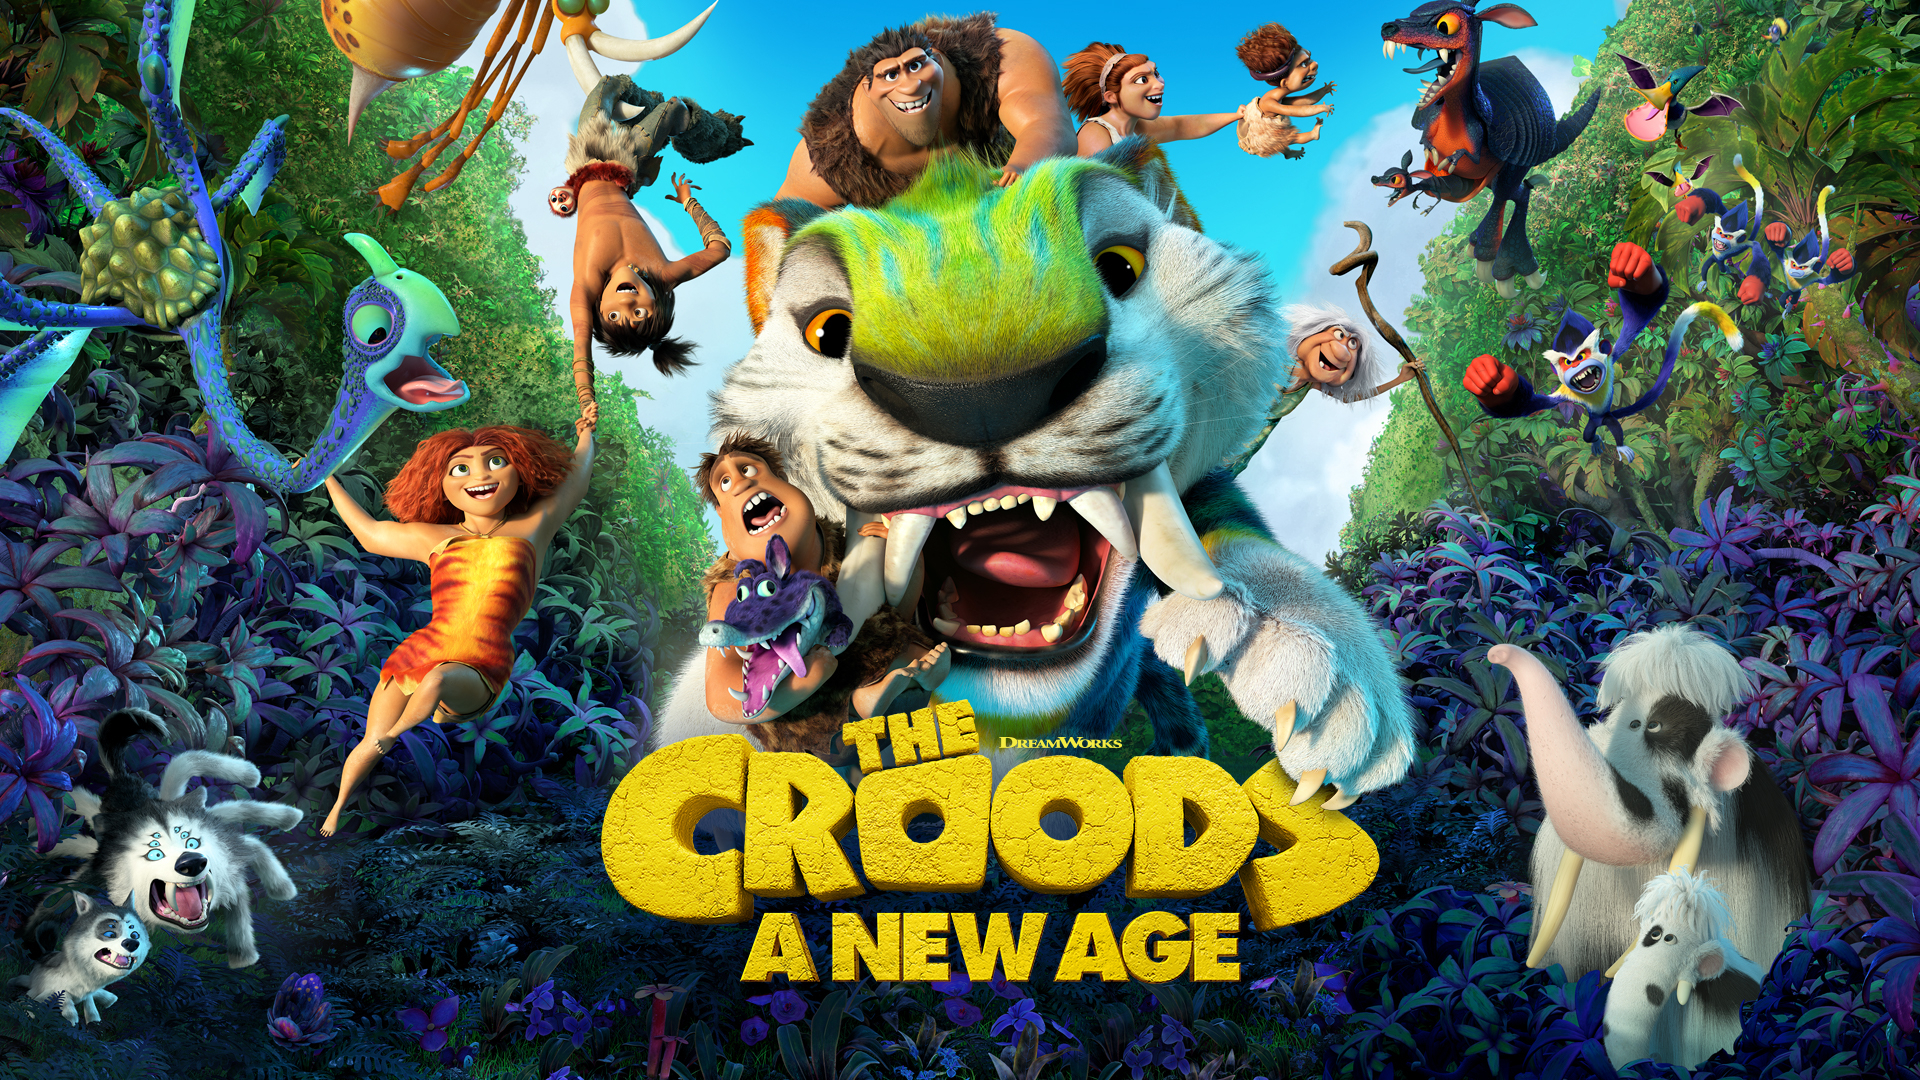 1920x1080 The Croods: A New Age HD Wallpaper